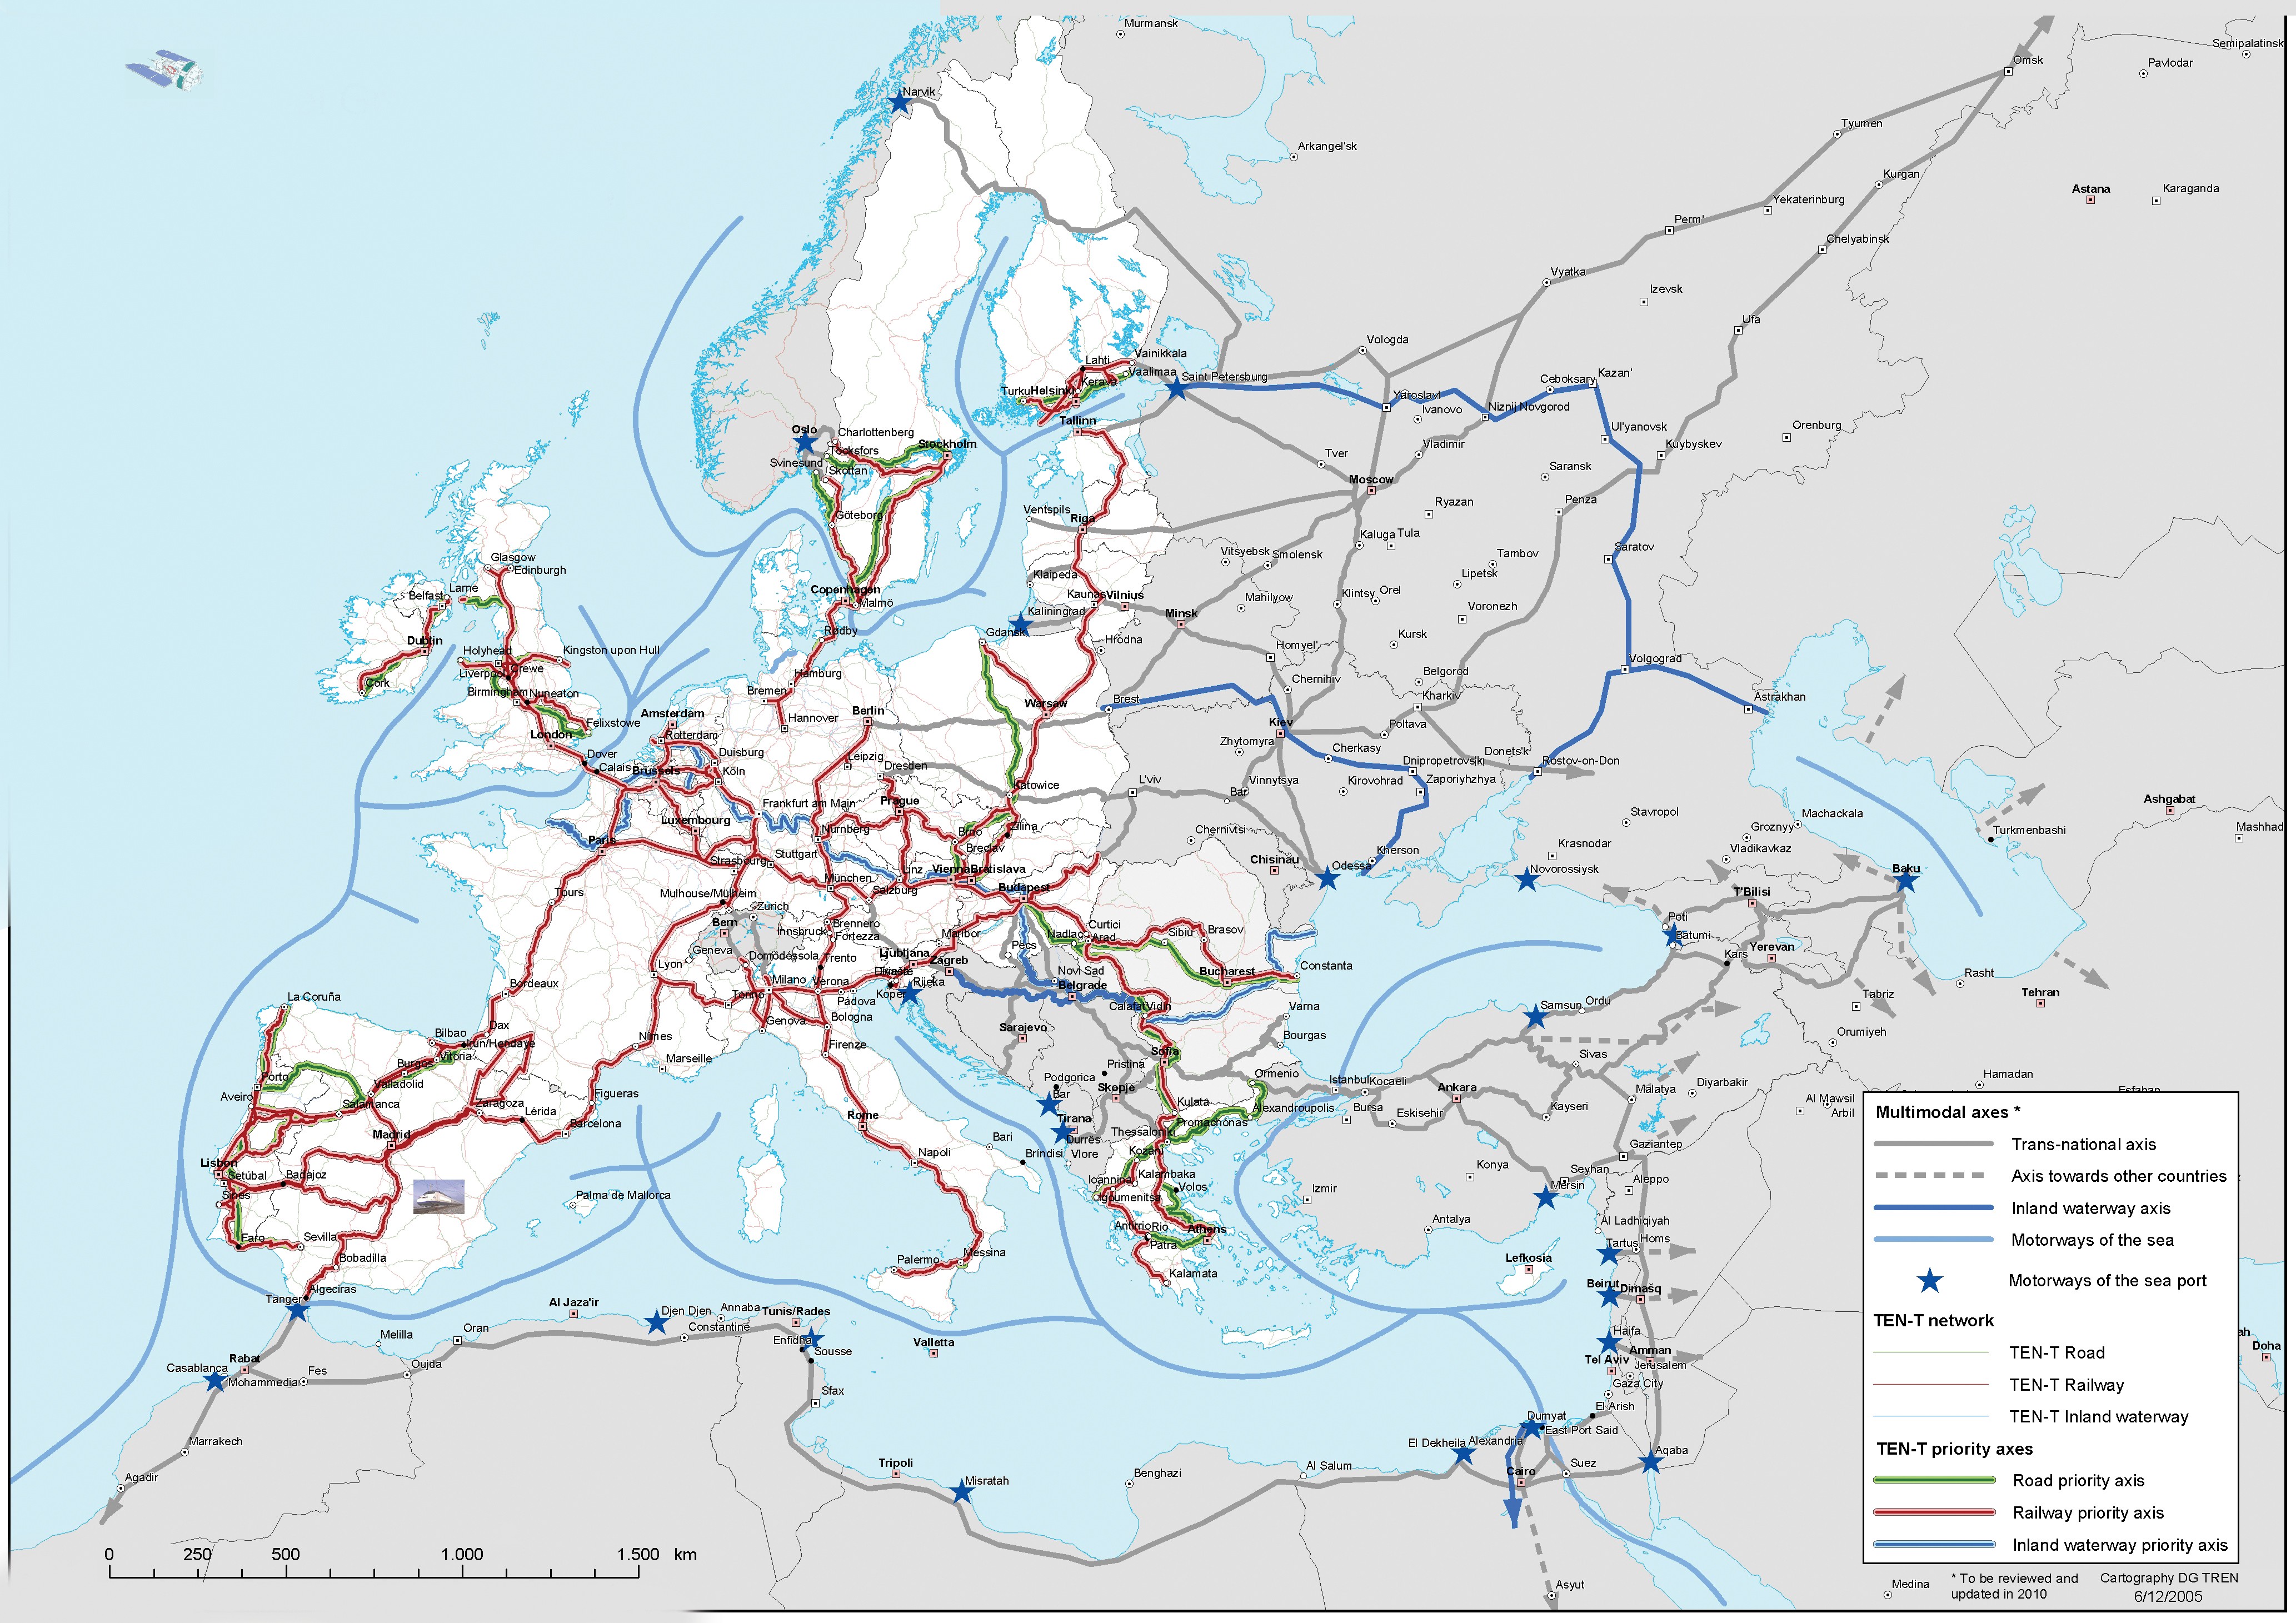 Major trans-National axes and Motorways of the Sea ports